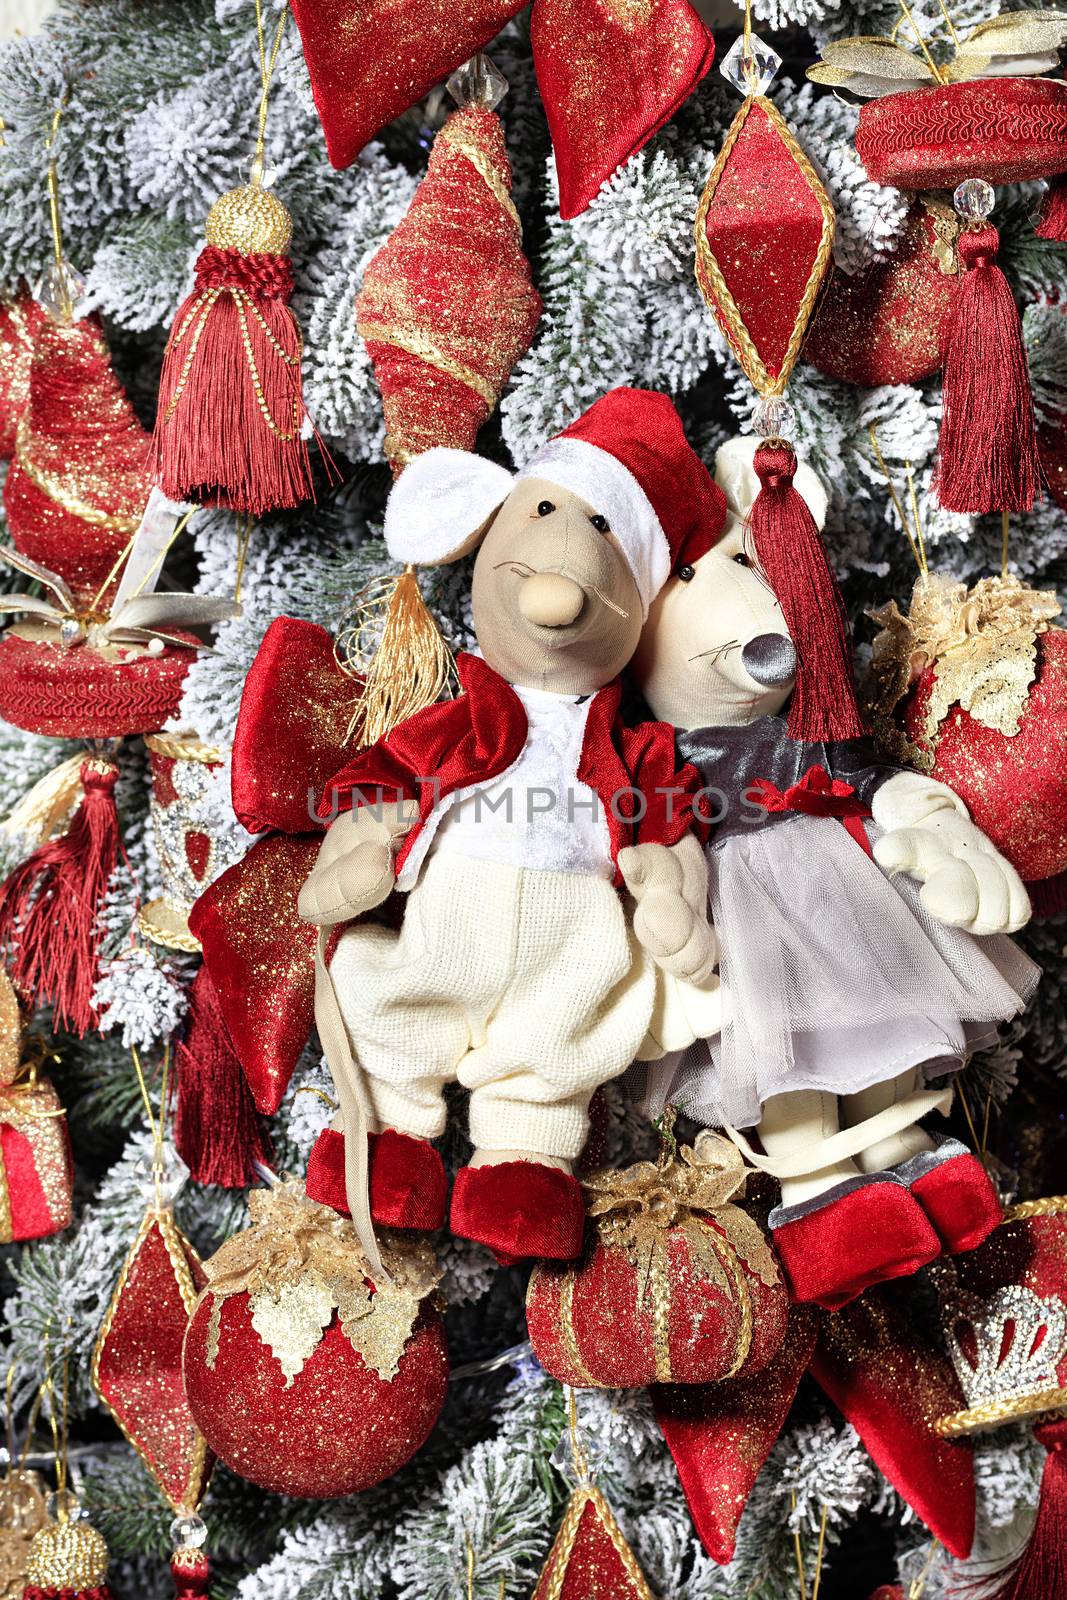 Pair of decorative toy mice dressed in a red frock coat and elegant dress are hanging on a Christmas tree on the eve of the rat year. New Year celebration concept, 2020 symbol,